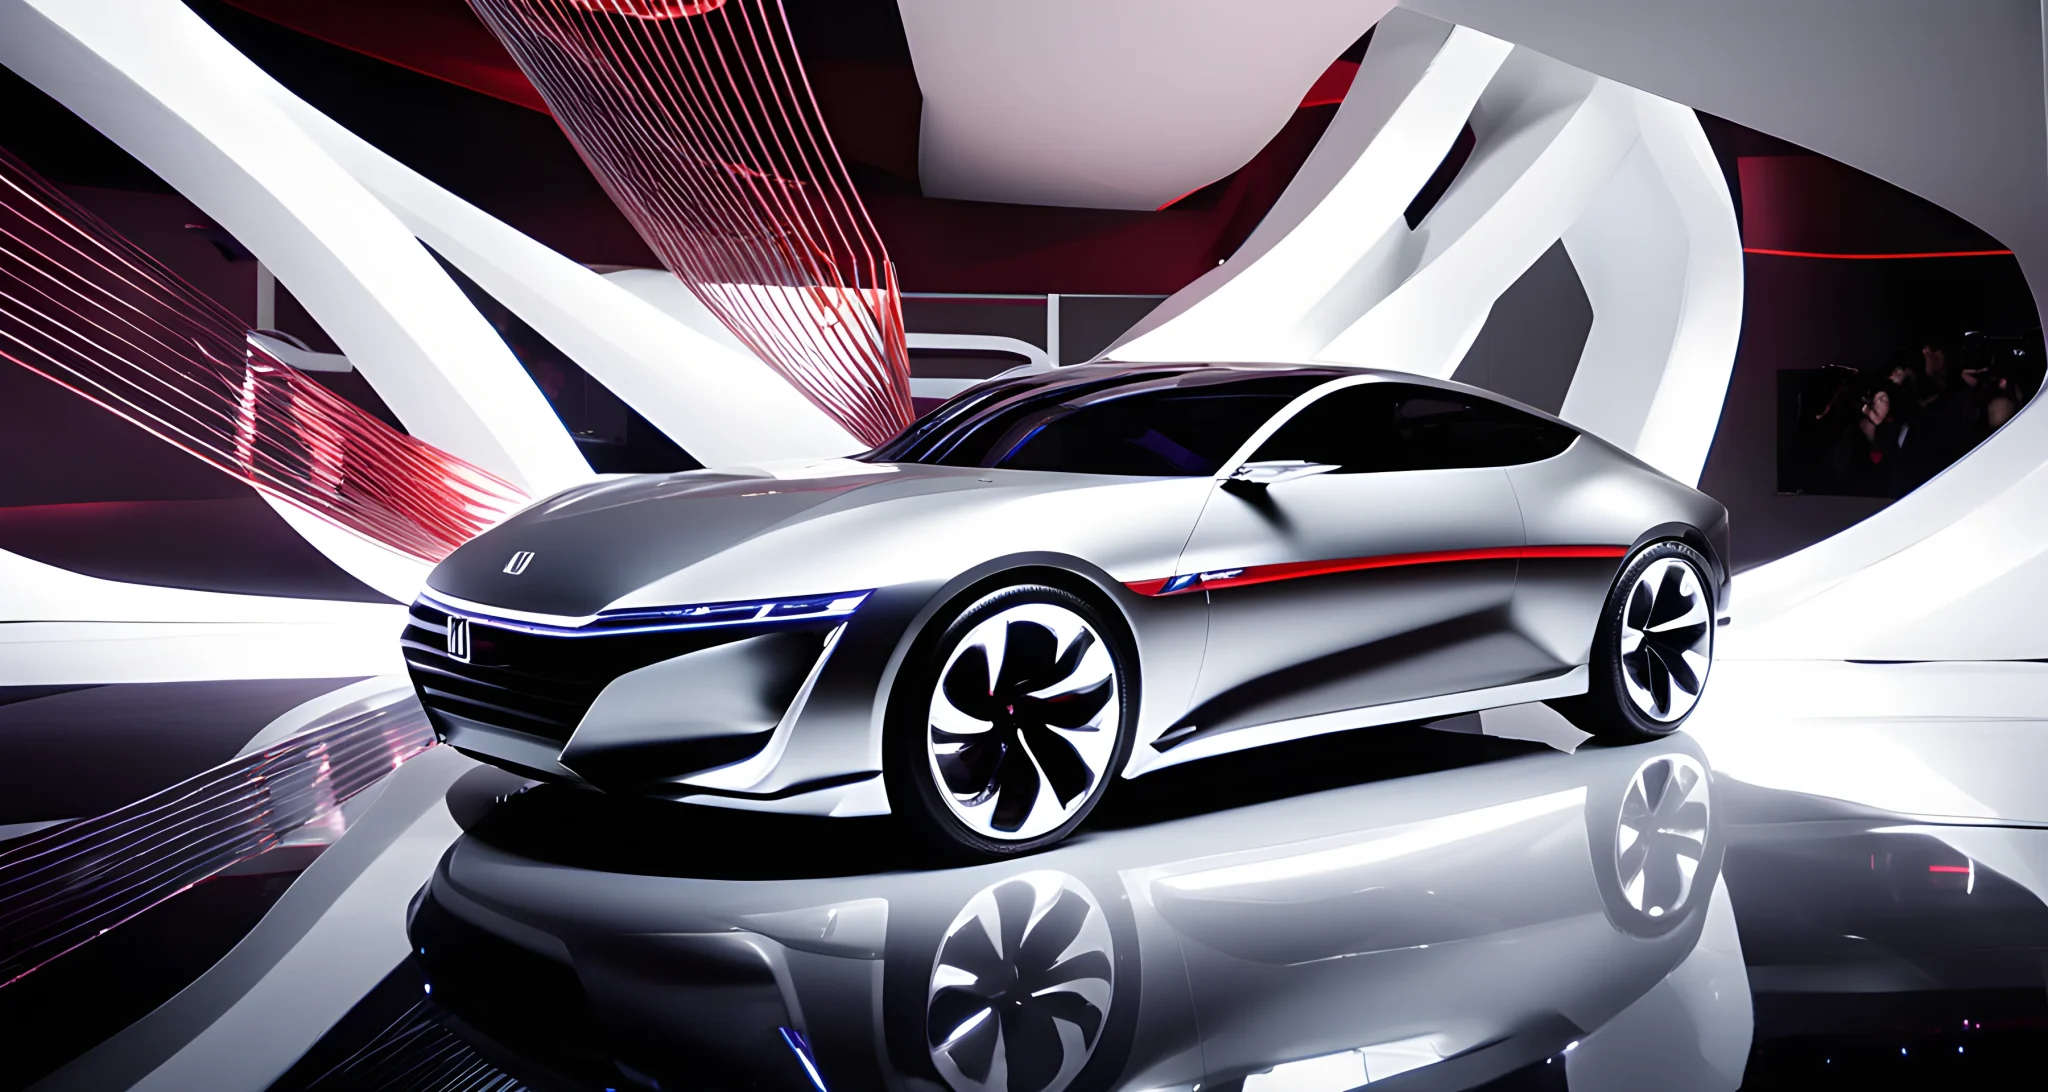 The image shows a sleek, futuristic Honda Prelude concept car on display at the unveiling event.